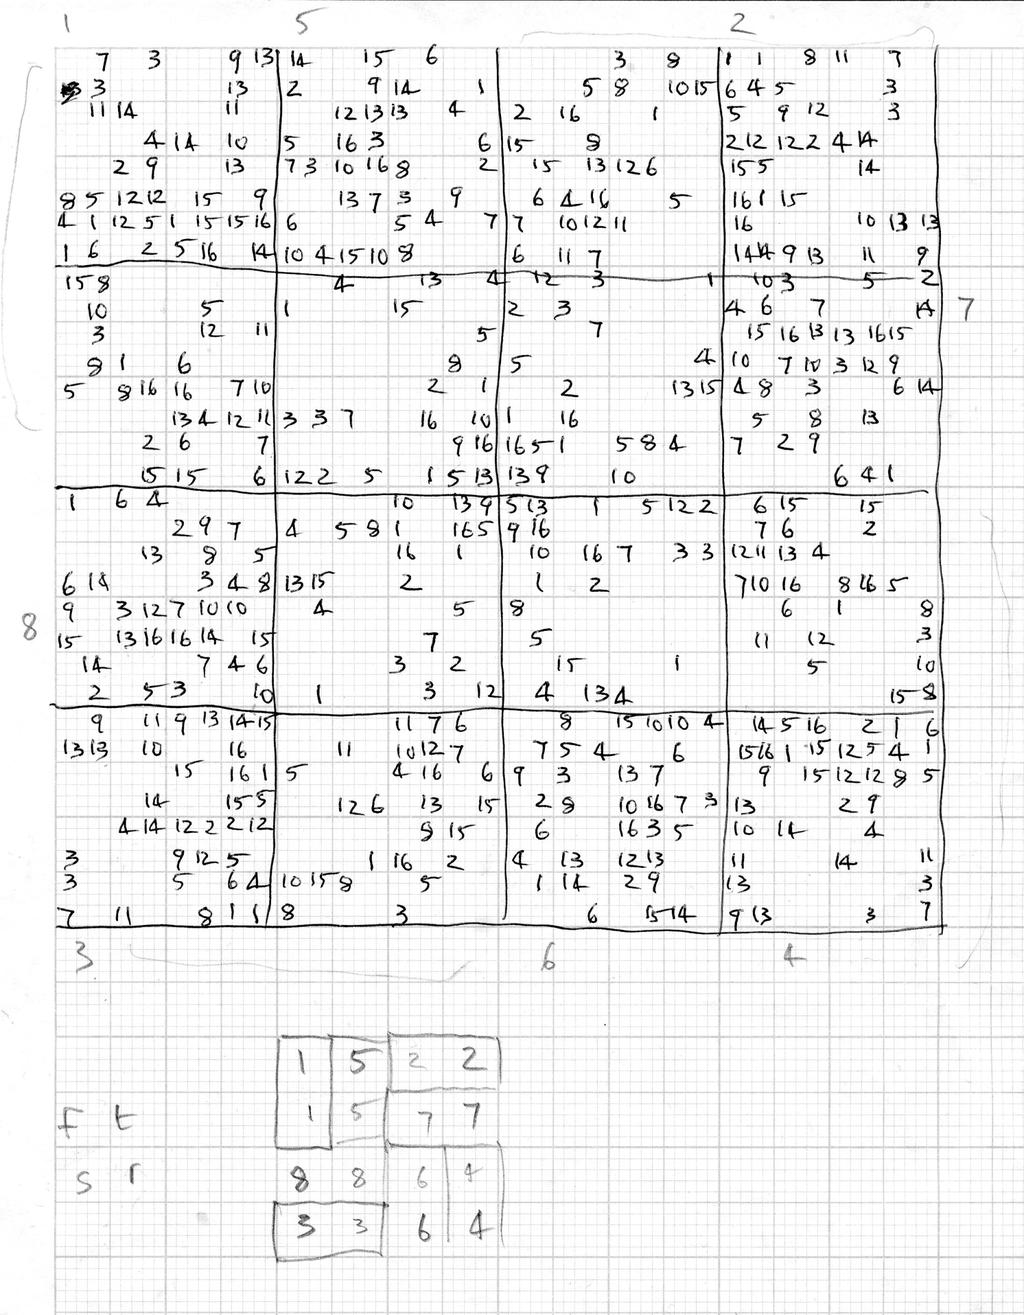 Ex. 1: Superimposed sudoku grids The group of sixteen squares have been sub-divided into eight pairs, as shown by the small diagram towards the bottom of the page.